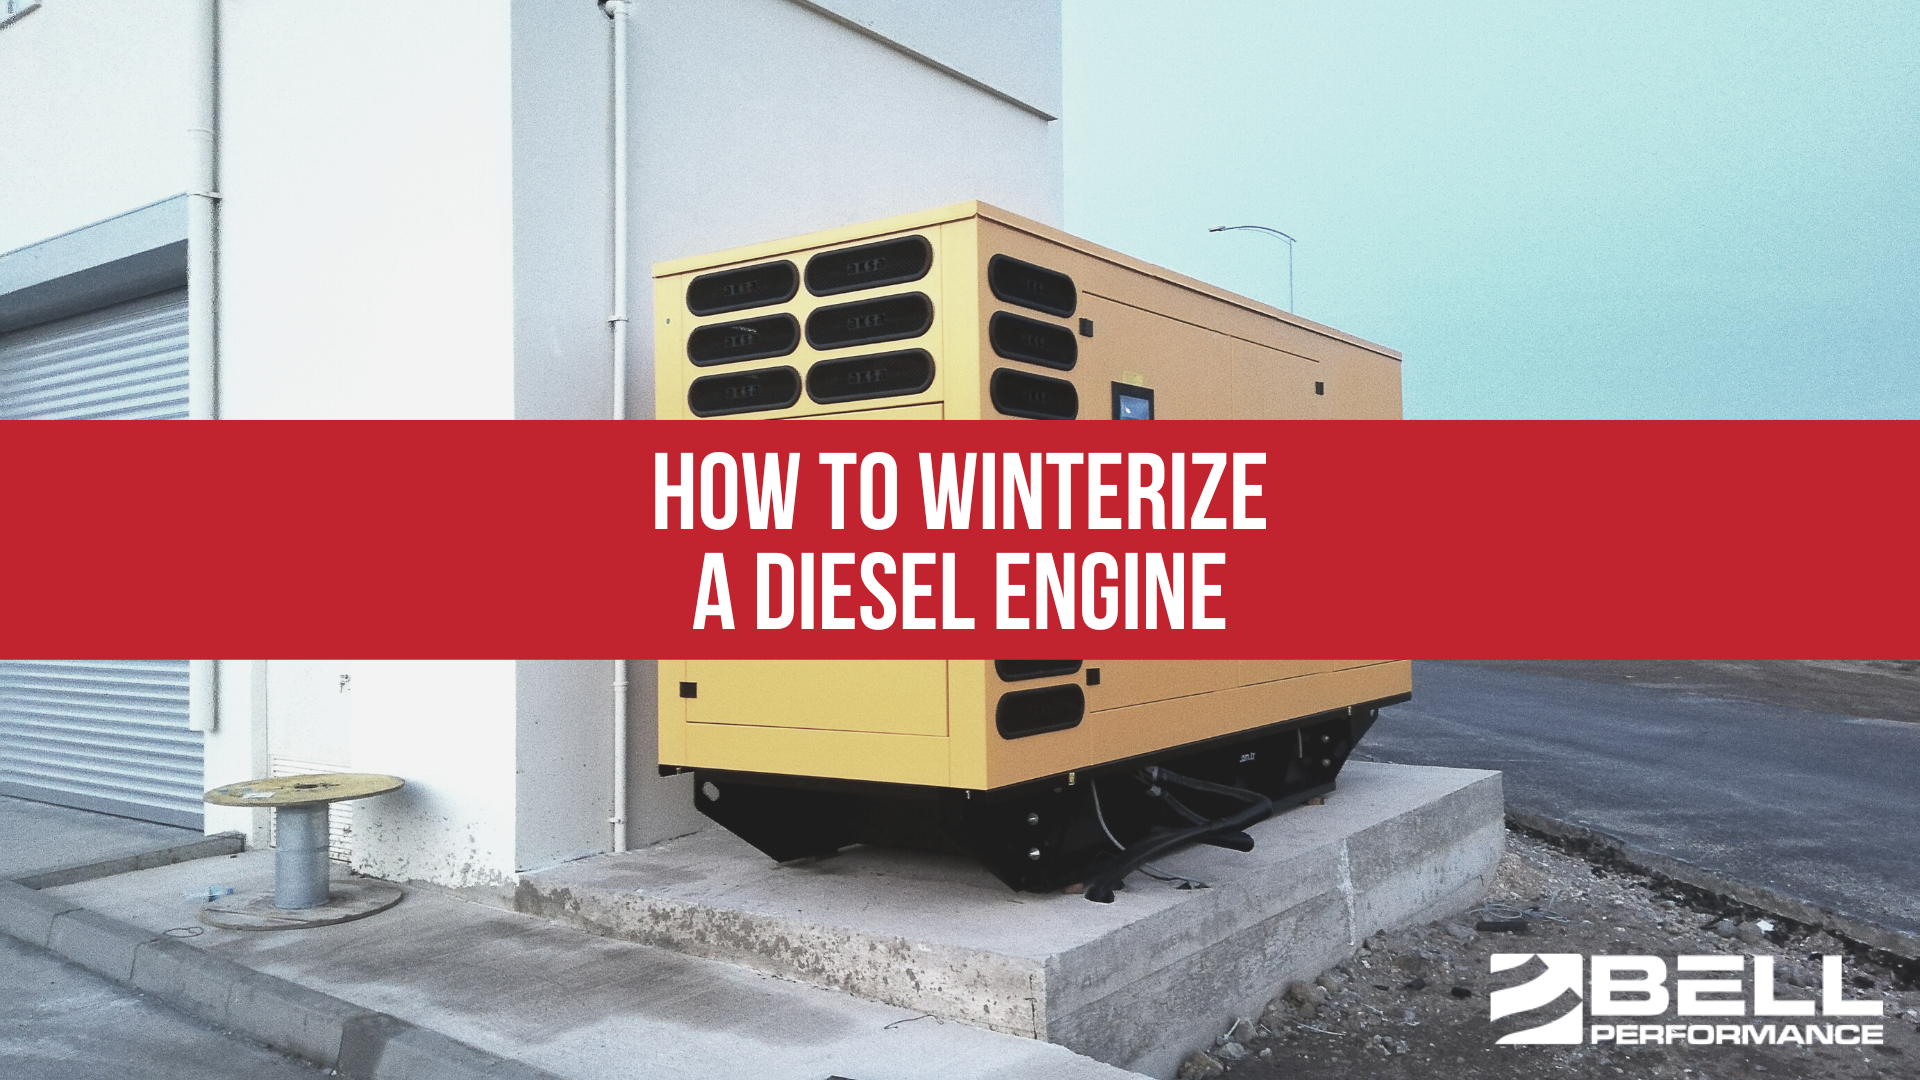 How to Winterize a Diesel Engine